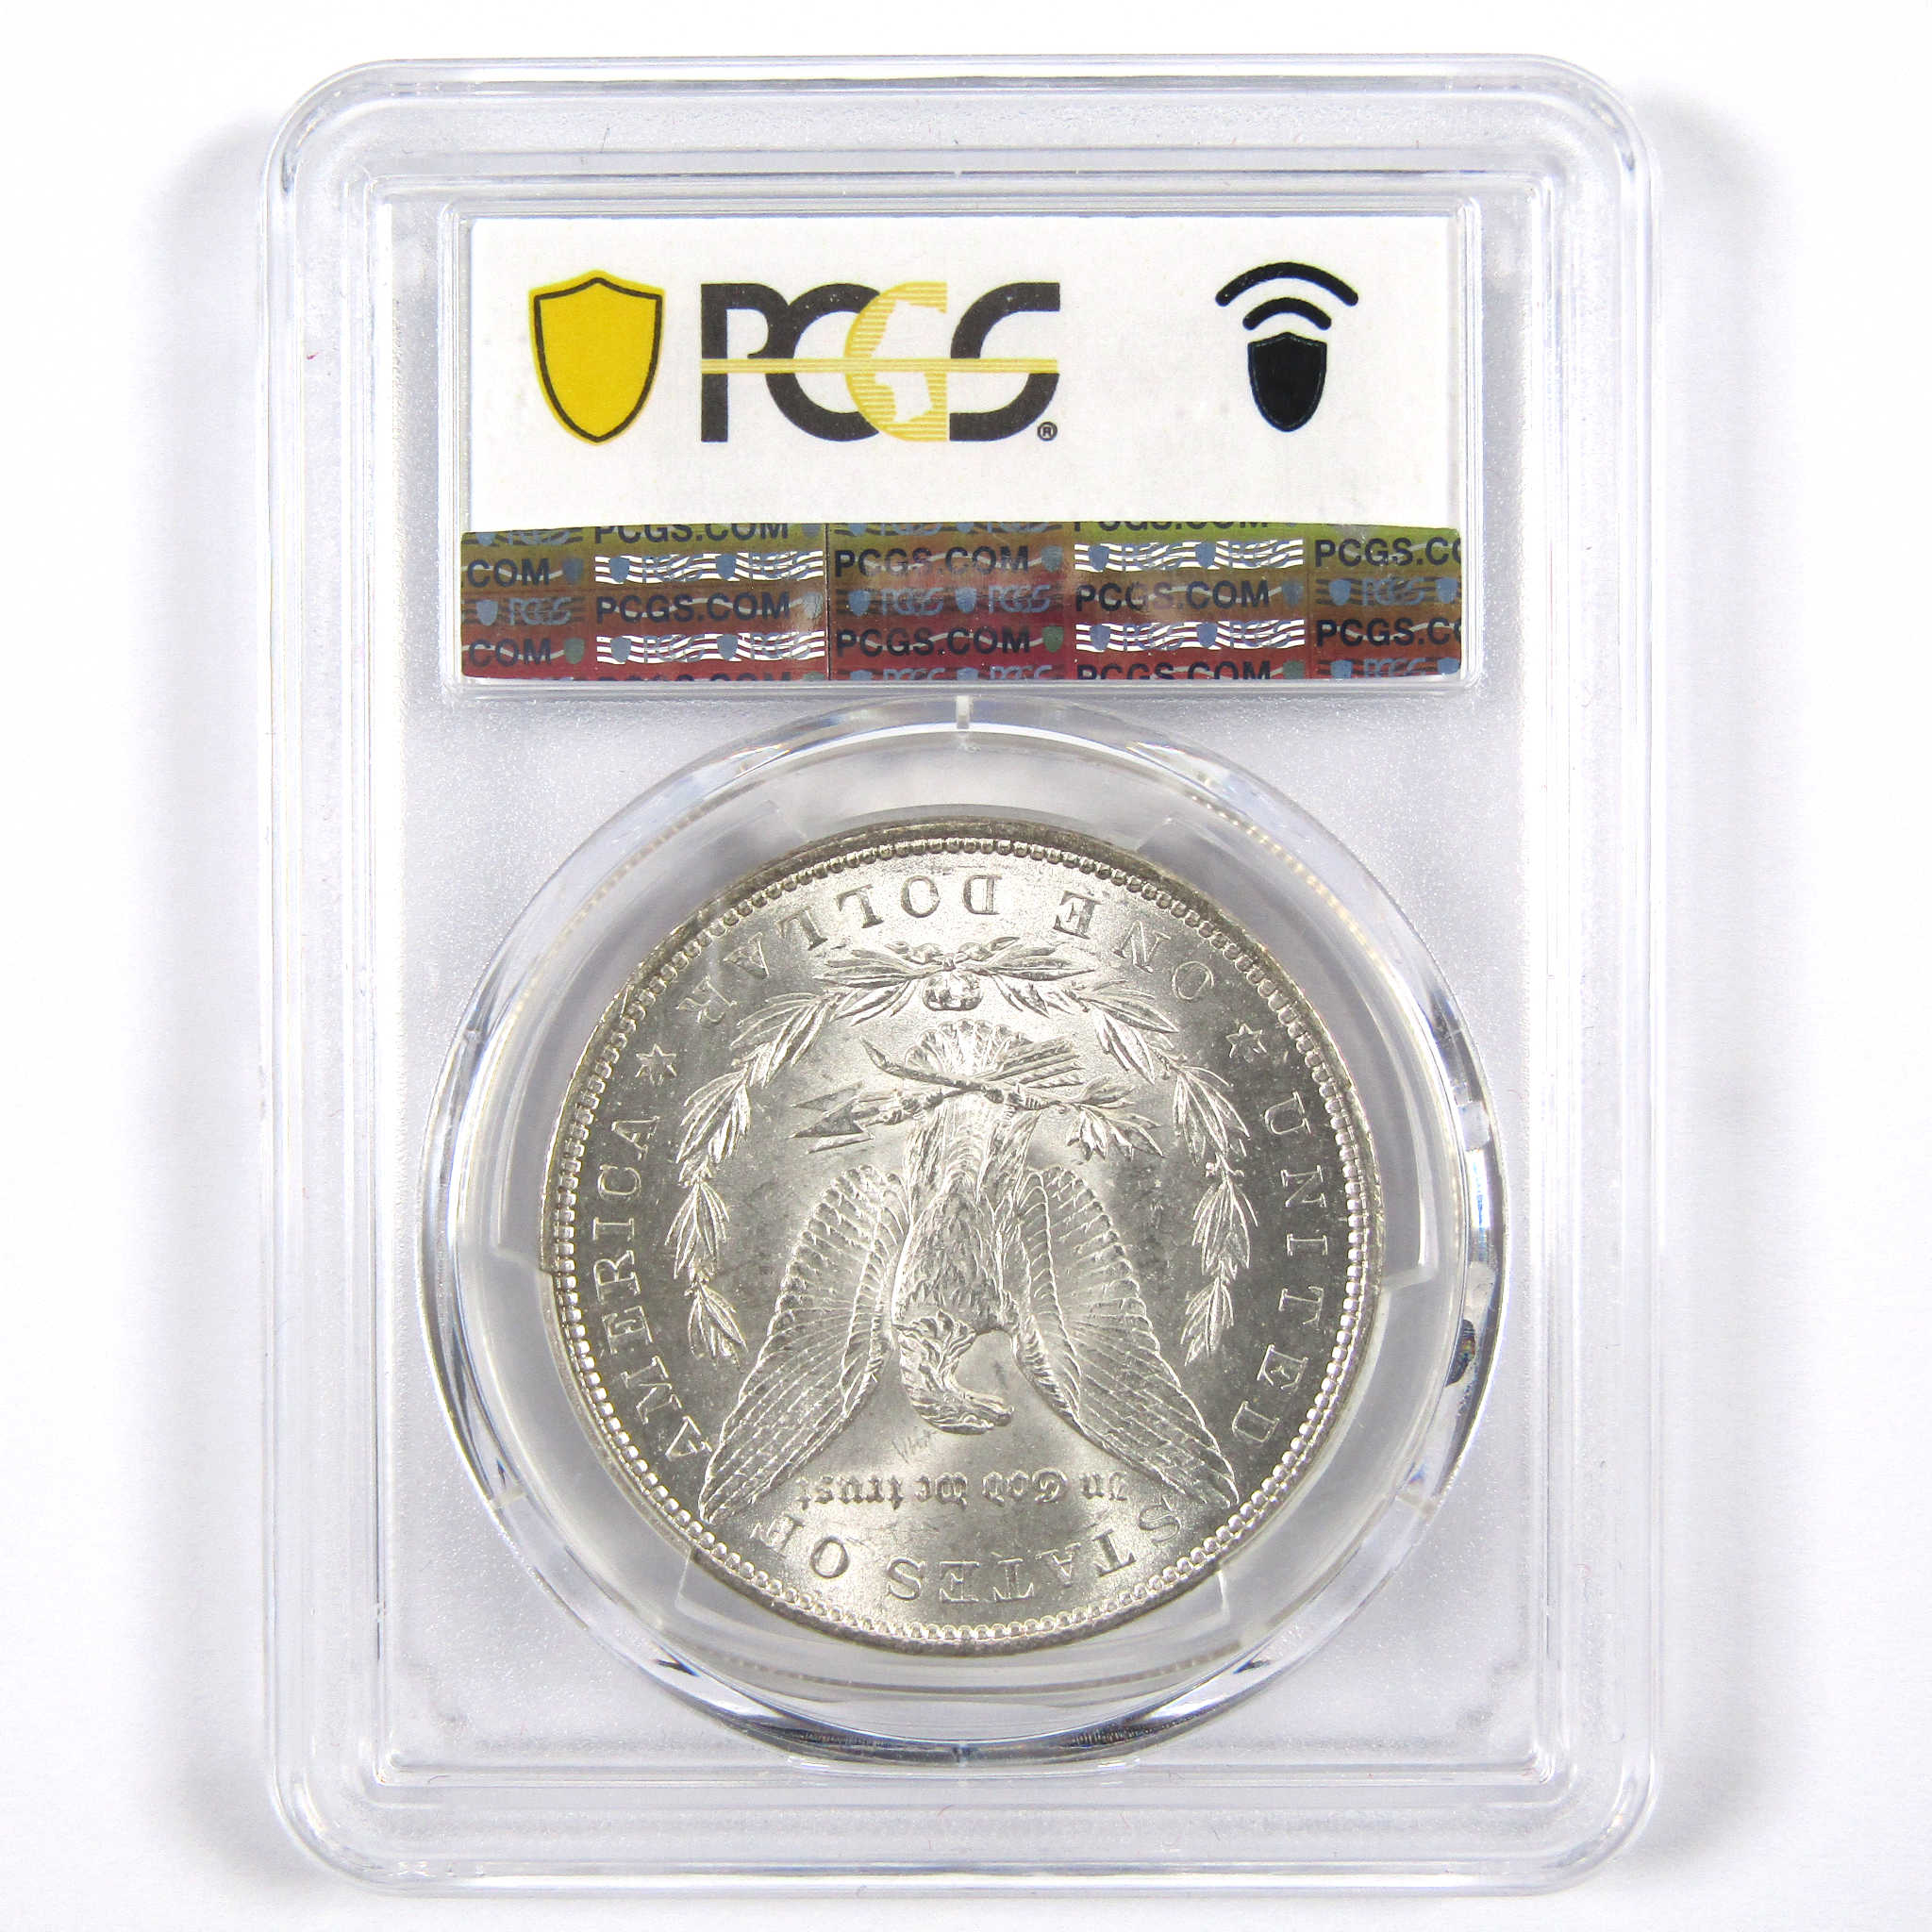 1878 7TF Rev 79 Morgan Dollar MS 63 PCGS 90% Silver $1 Unc SKU:I7545 - Morgan coin - Morgan silver dollar - Morgan silver dollar for sale - Profile Coins &amp; Collectibles